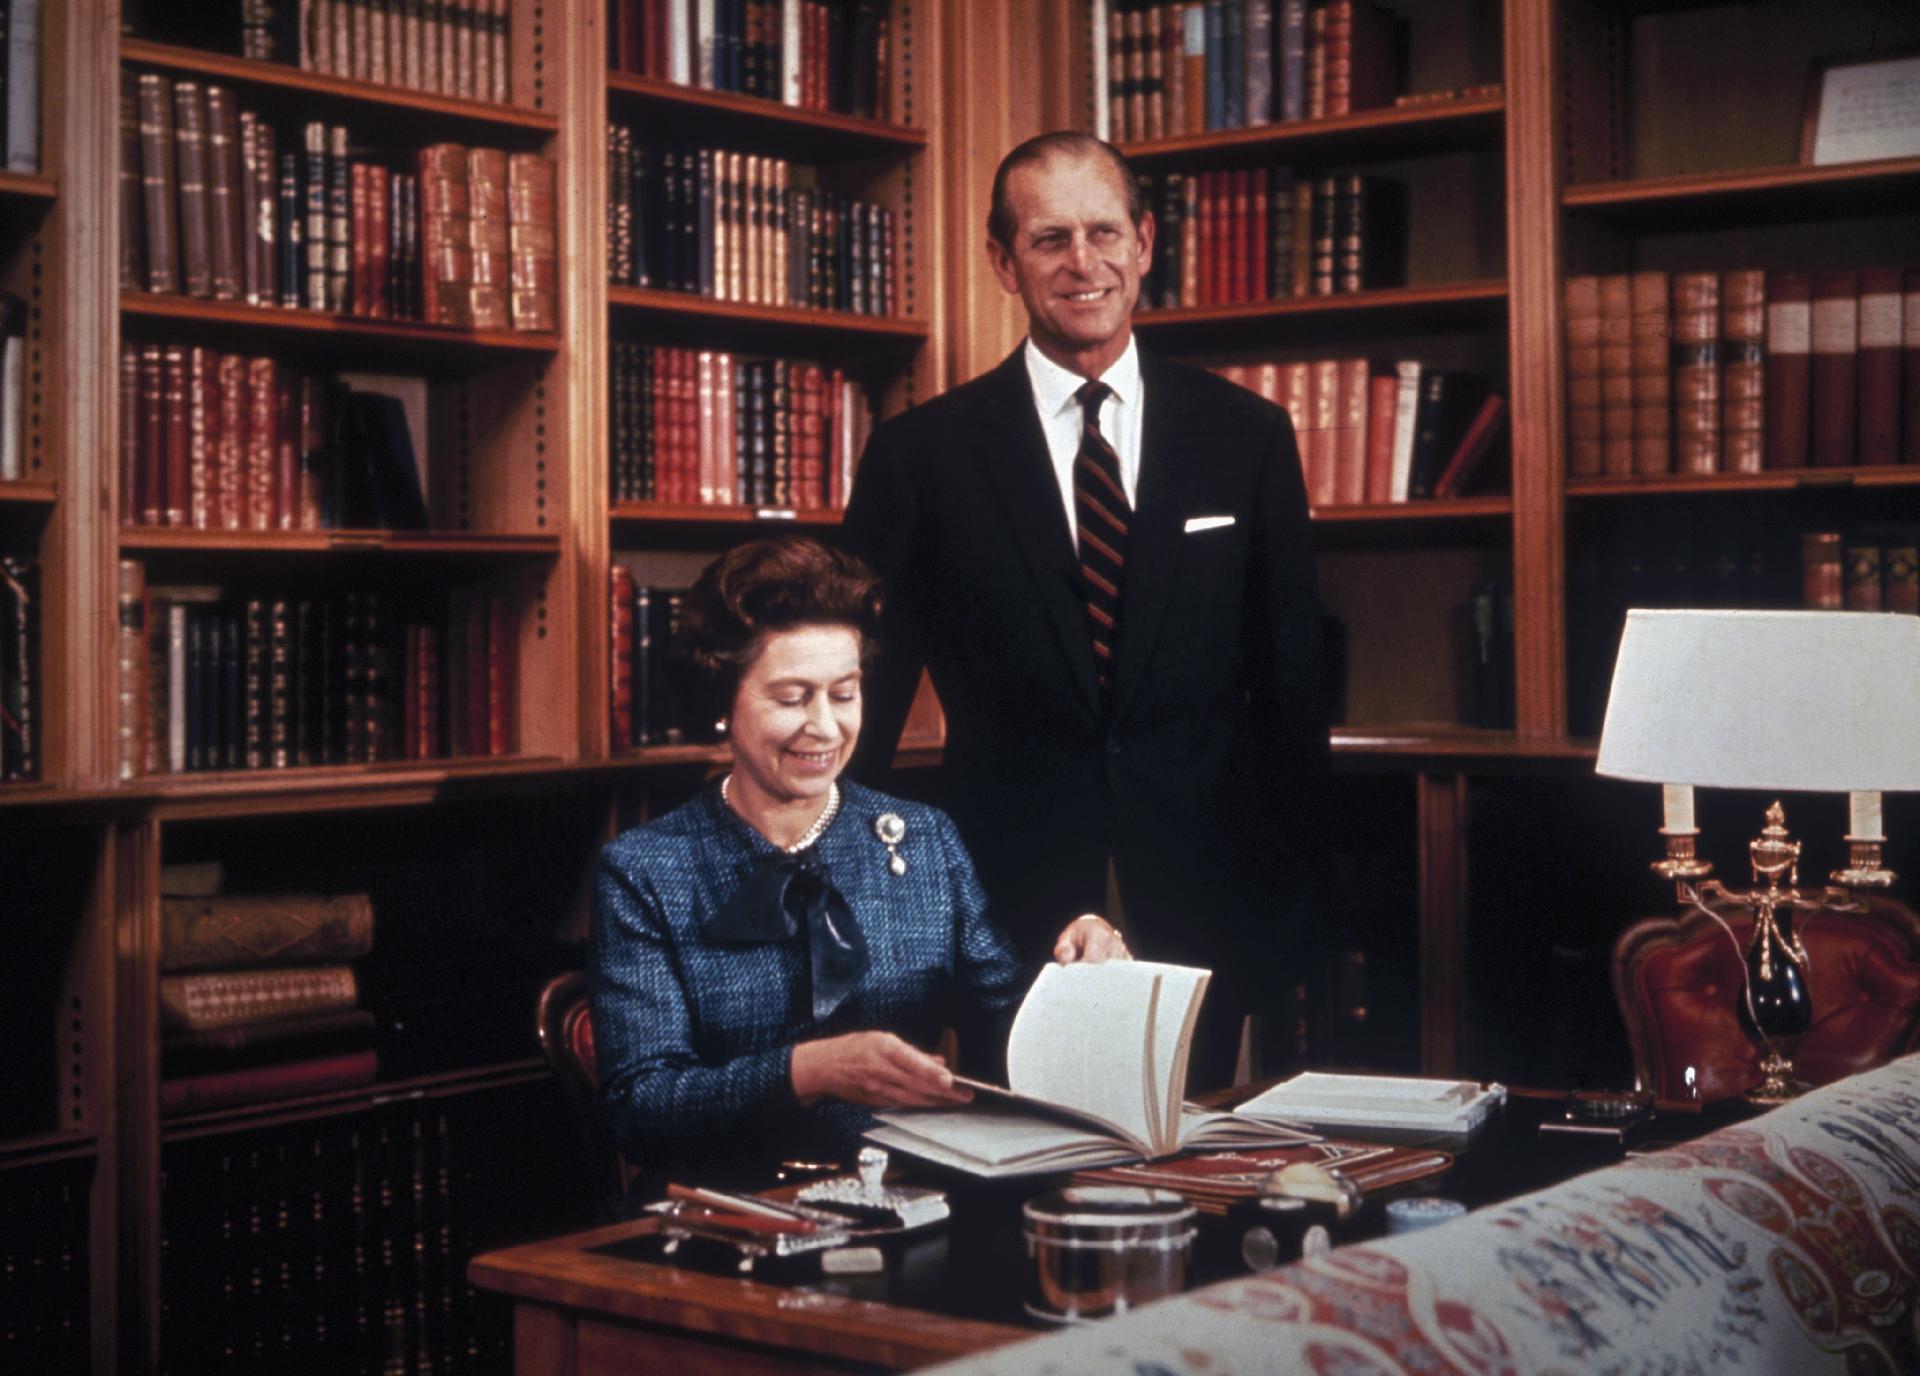 Portrait of Queen Elizabeth II and Prince Philip in 1976 - Getty Images